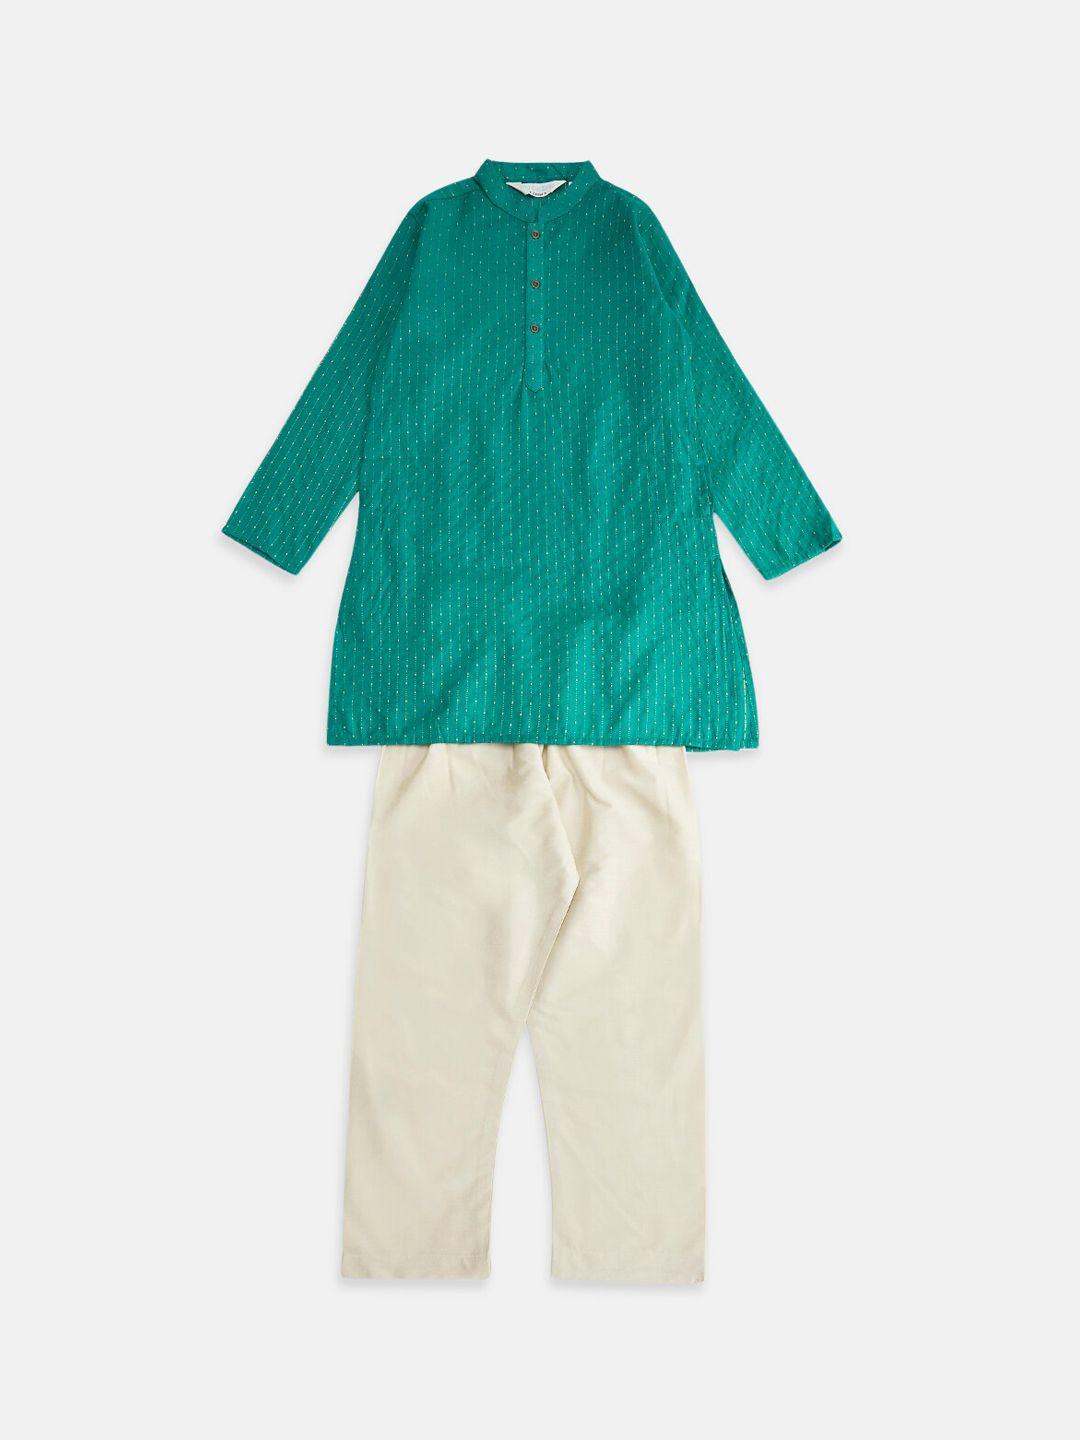 indus route by pantaloons boys teal green & white striped kurta with pyjama